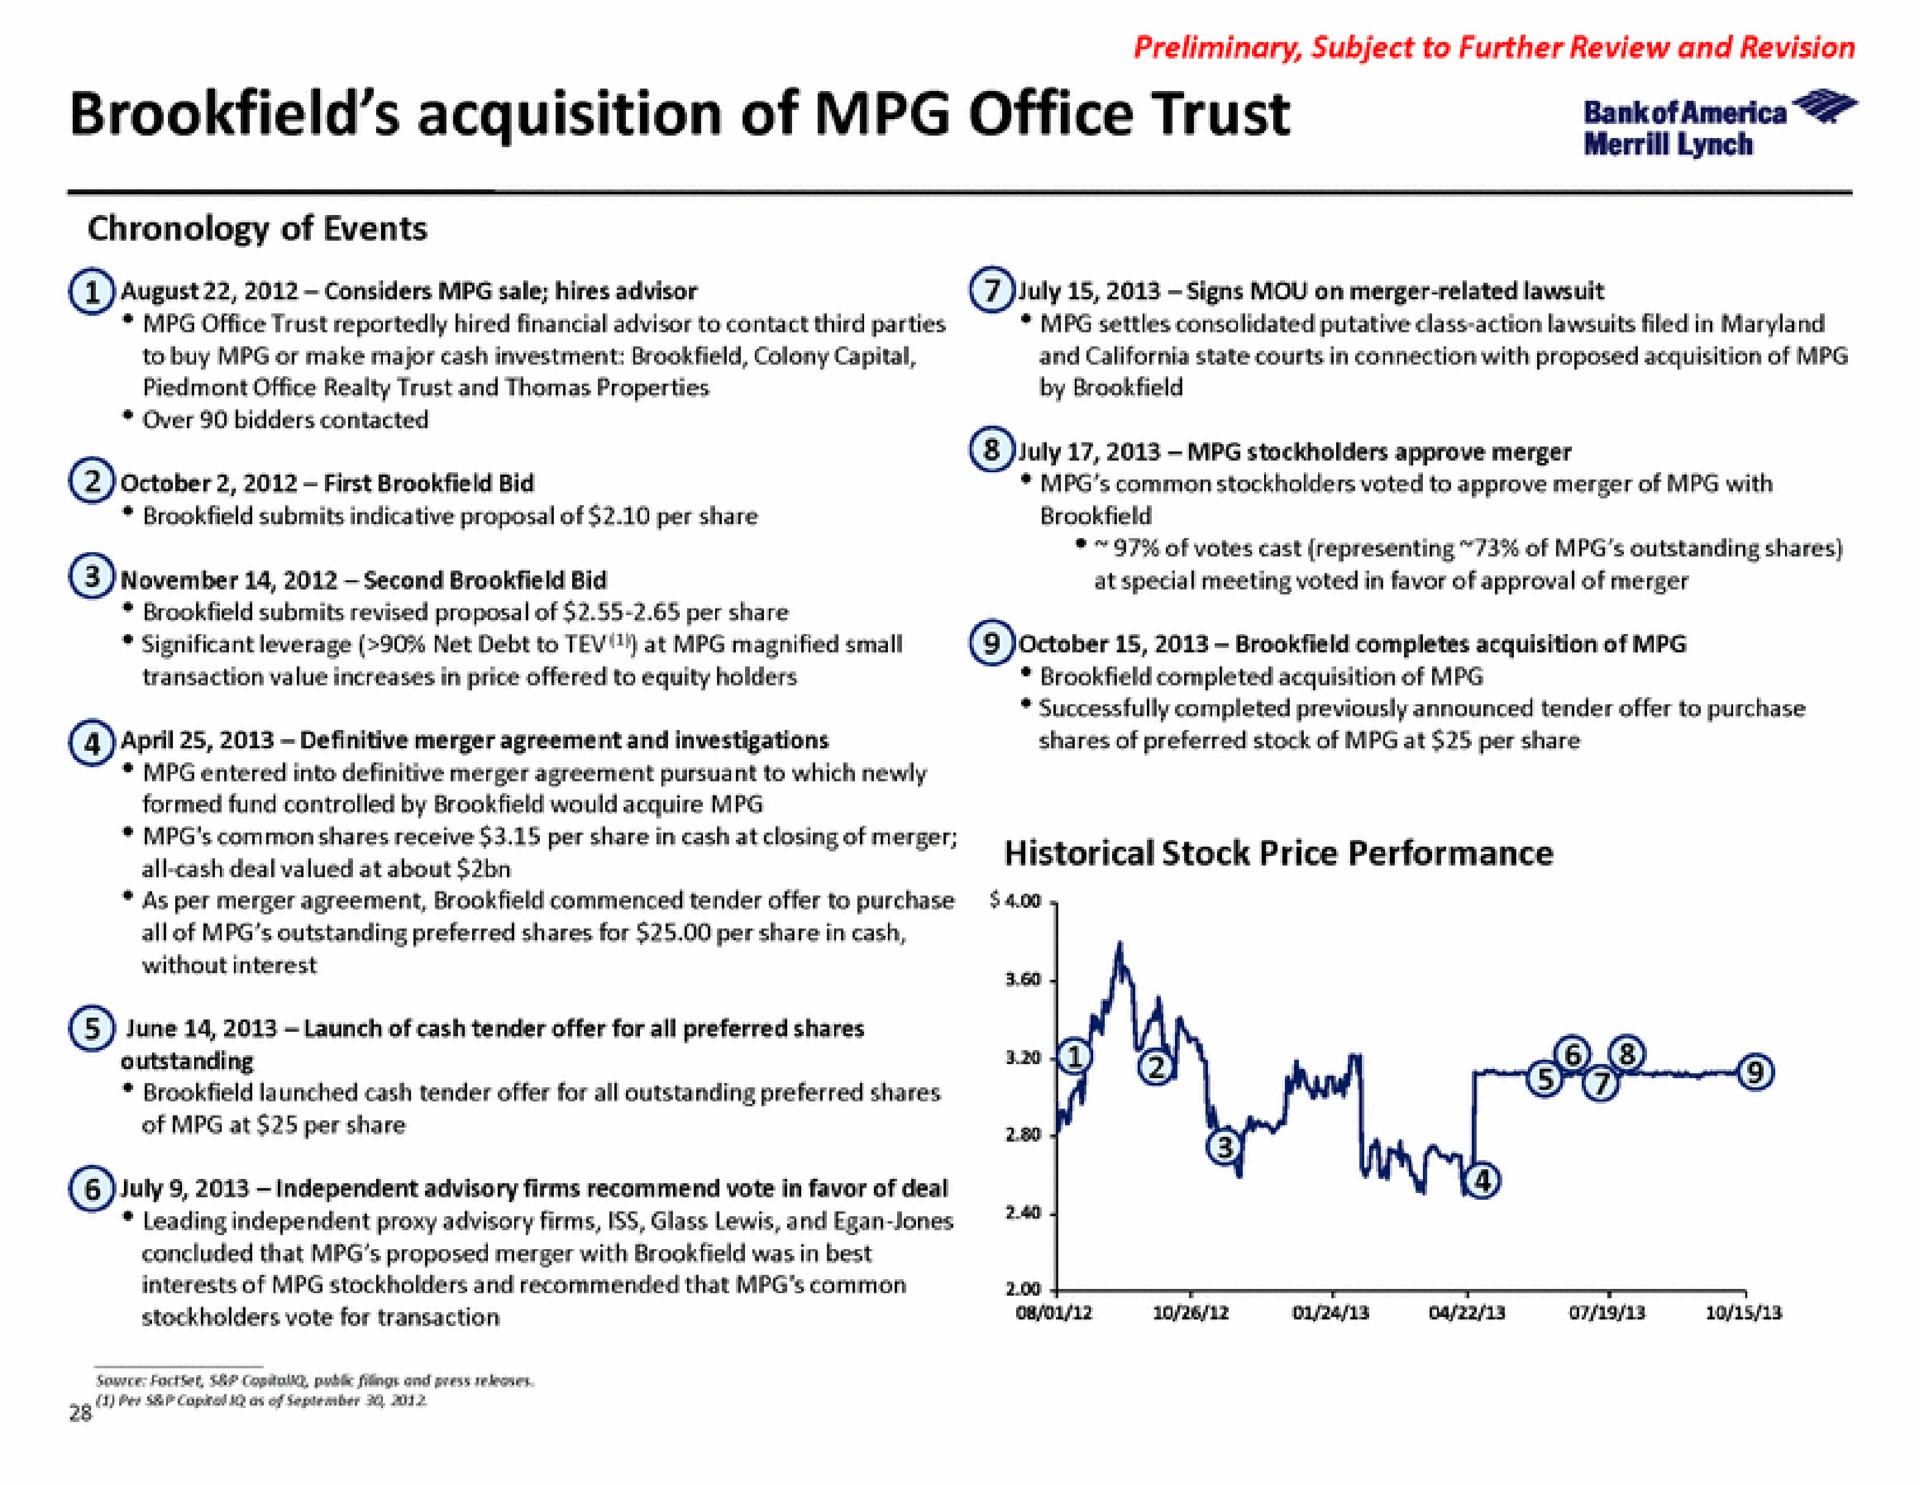 acquisition of office trust per share in cash merger historical stock price performance | Bank of America